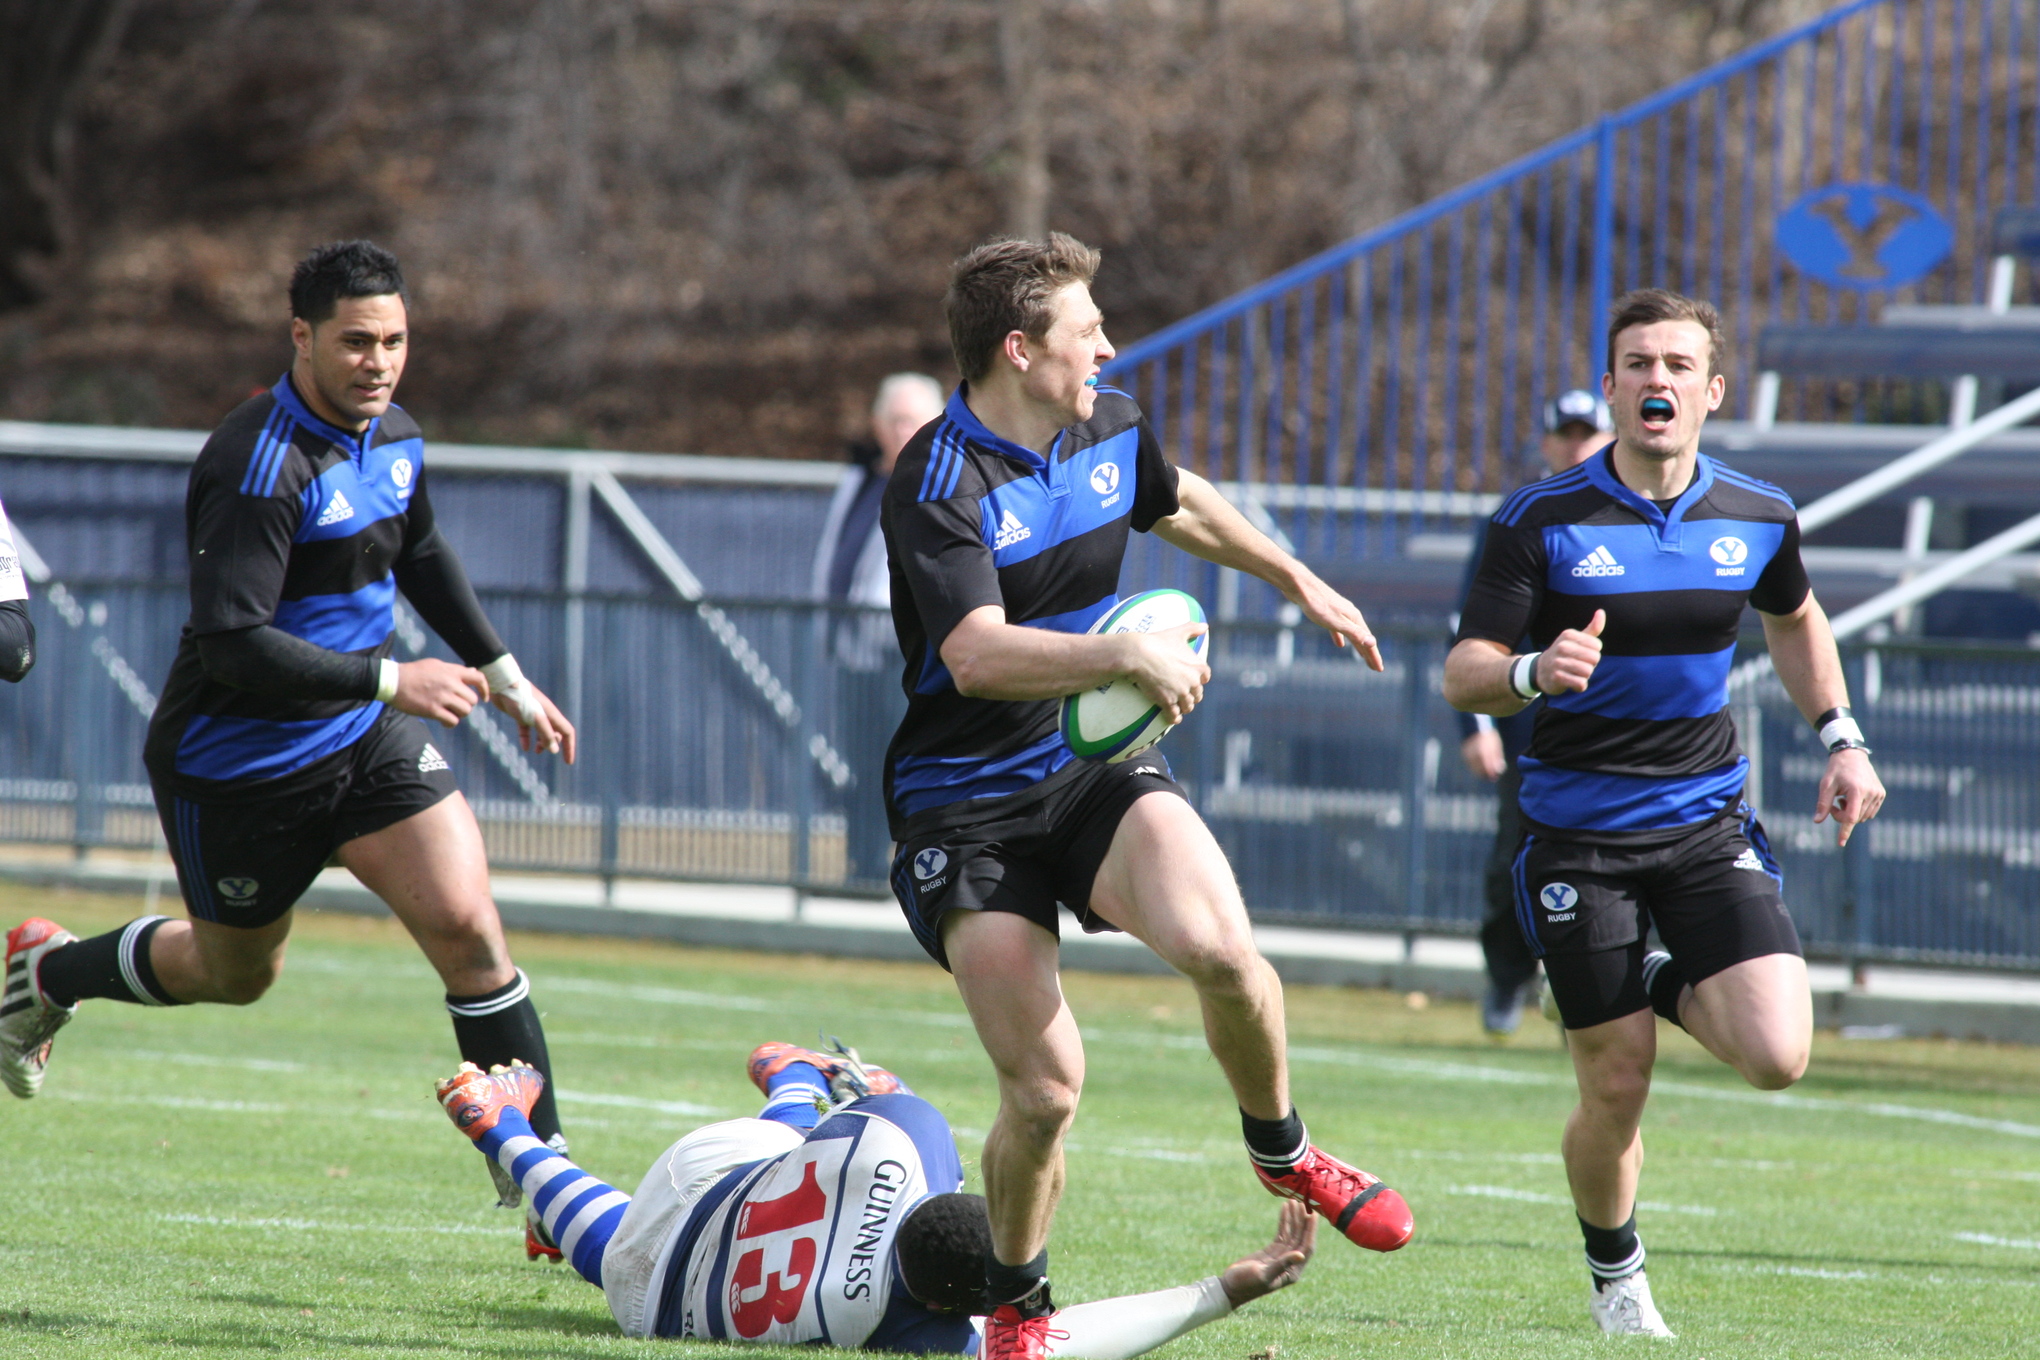 BYU continues their quest for the Varsity Cup